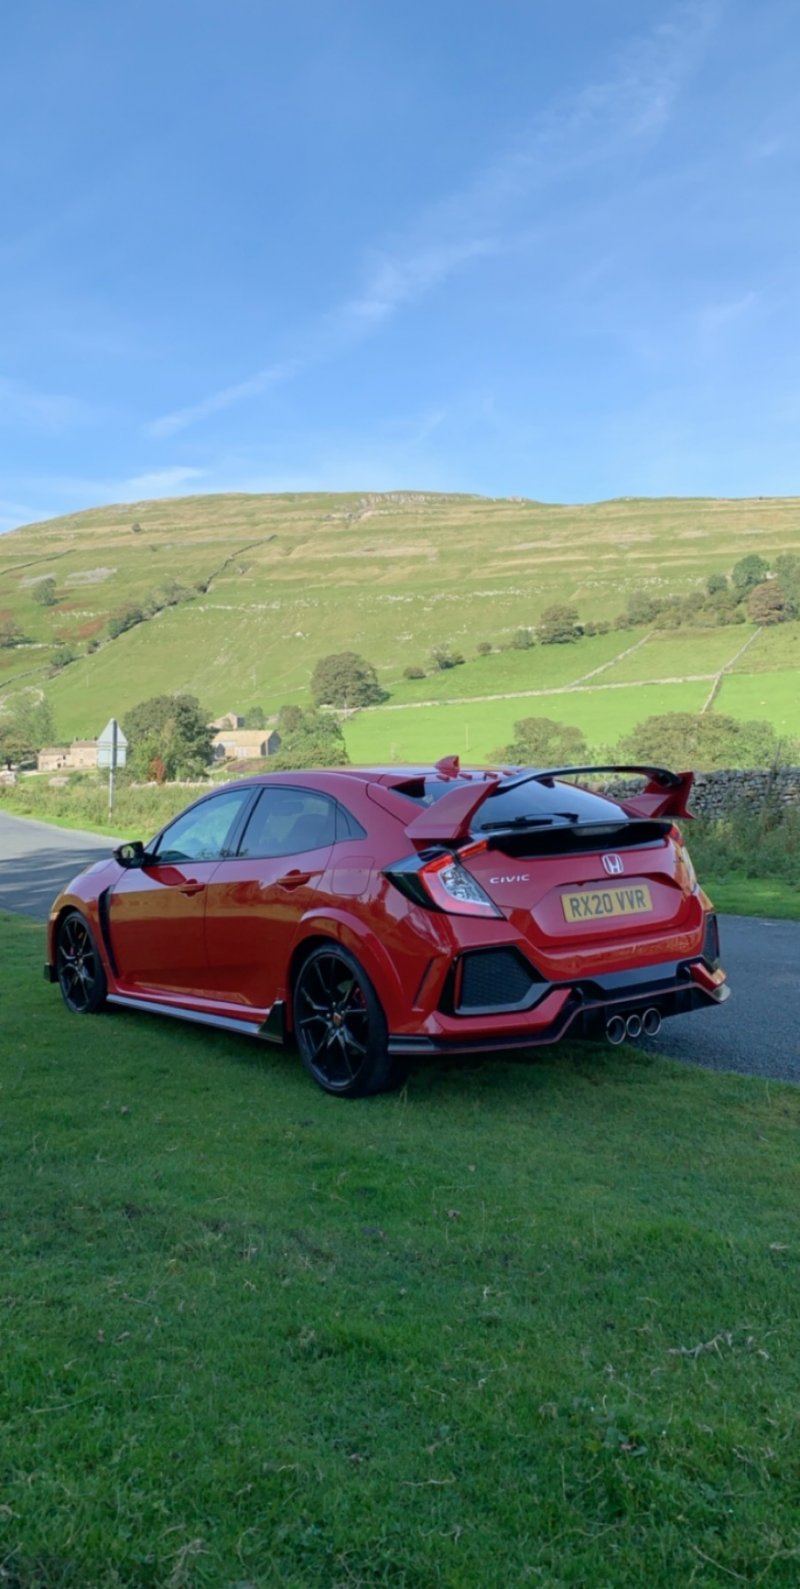 Main image for Type R remains an all-time great